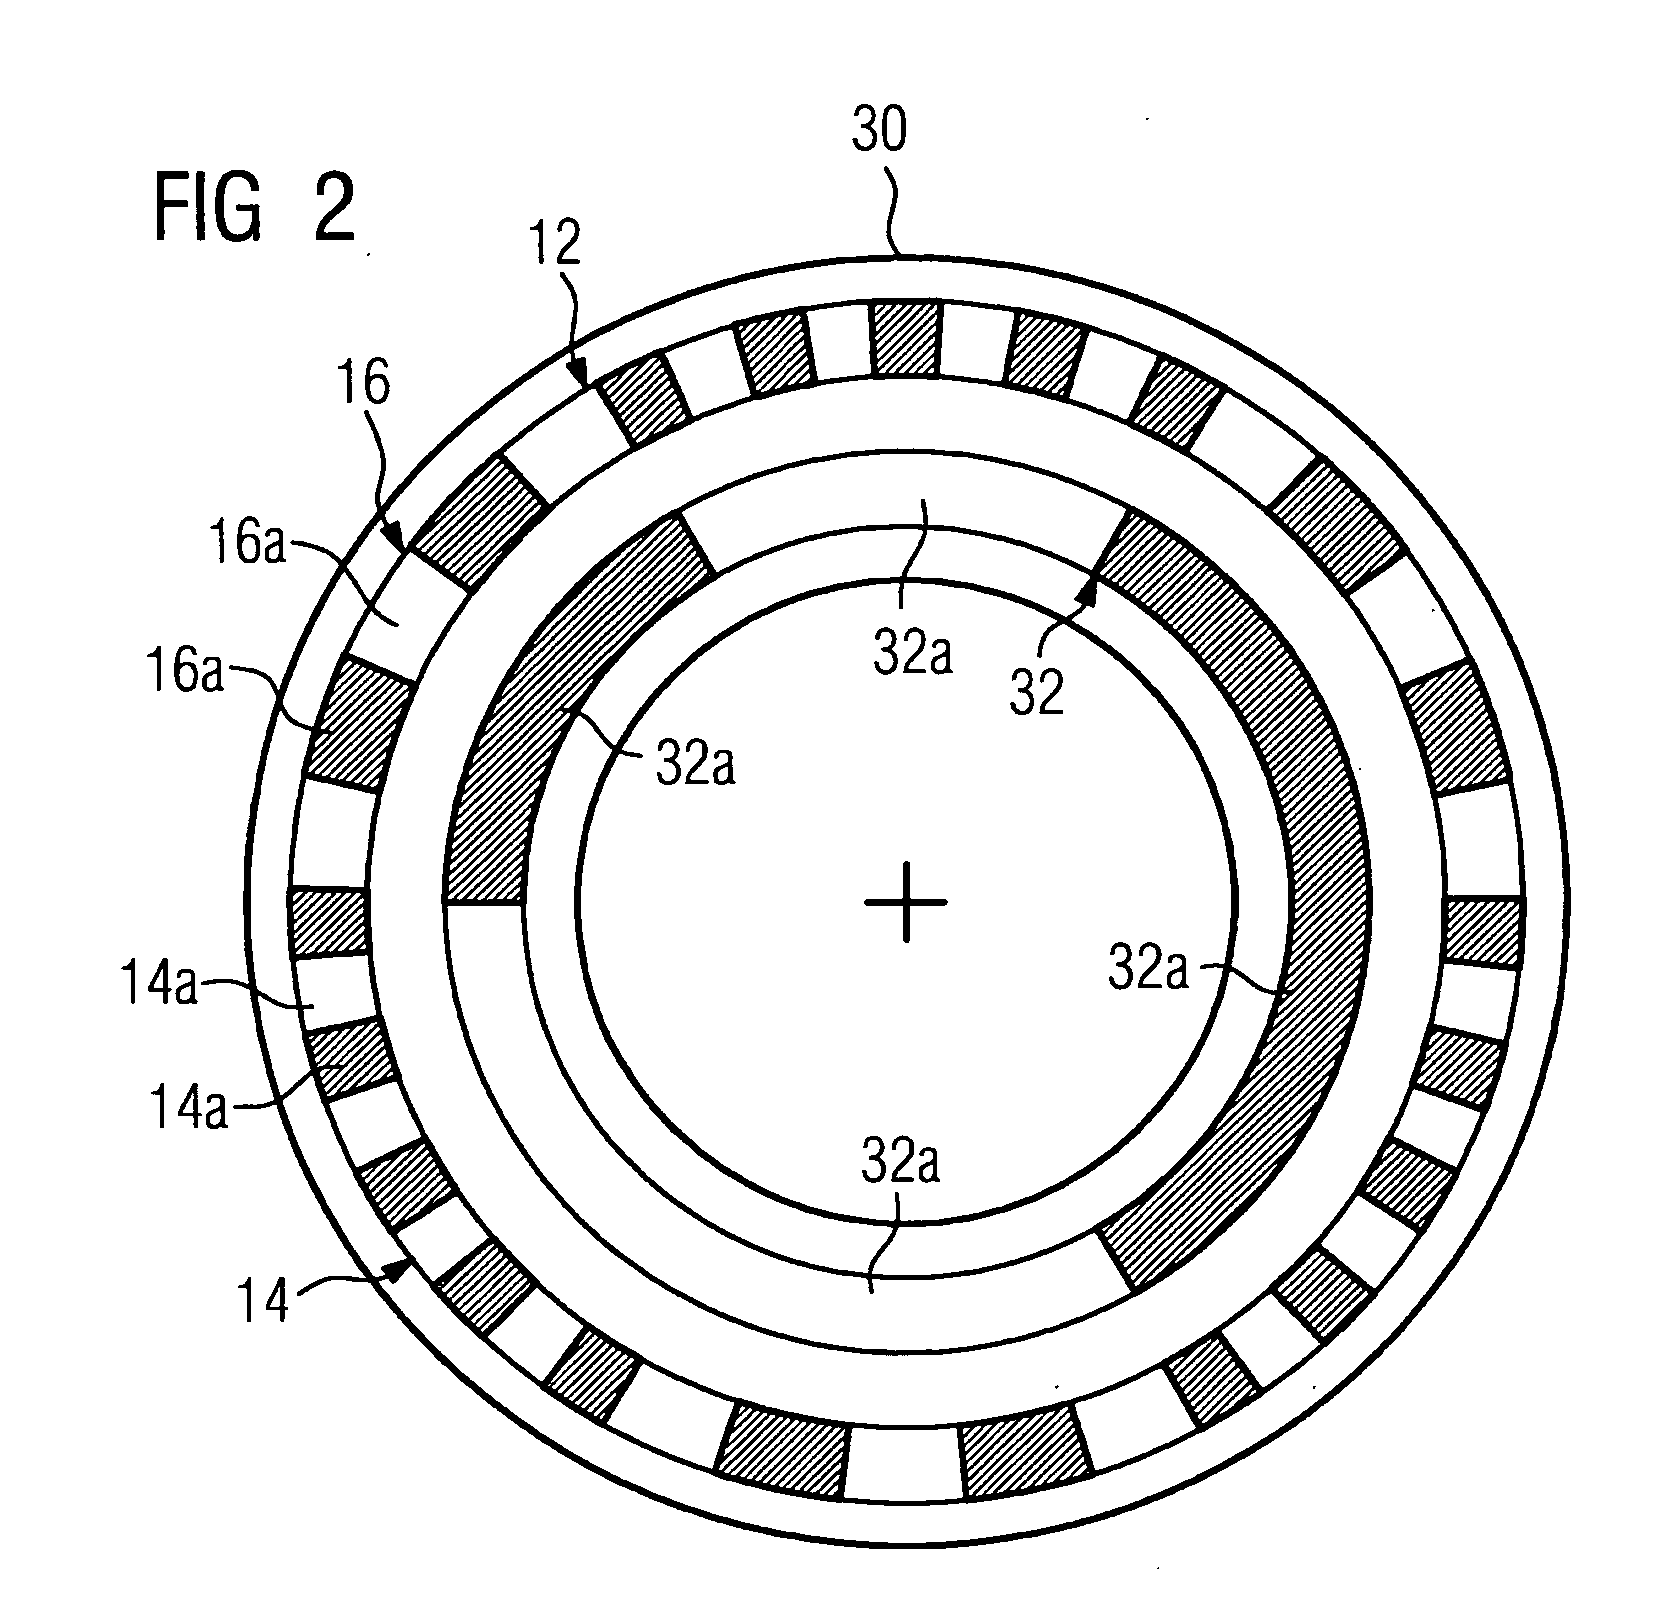 Measuring element comprising a track used as a material measure and corresponding measurement method carried out by means of such a measuring element